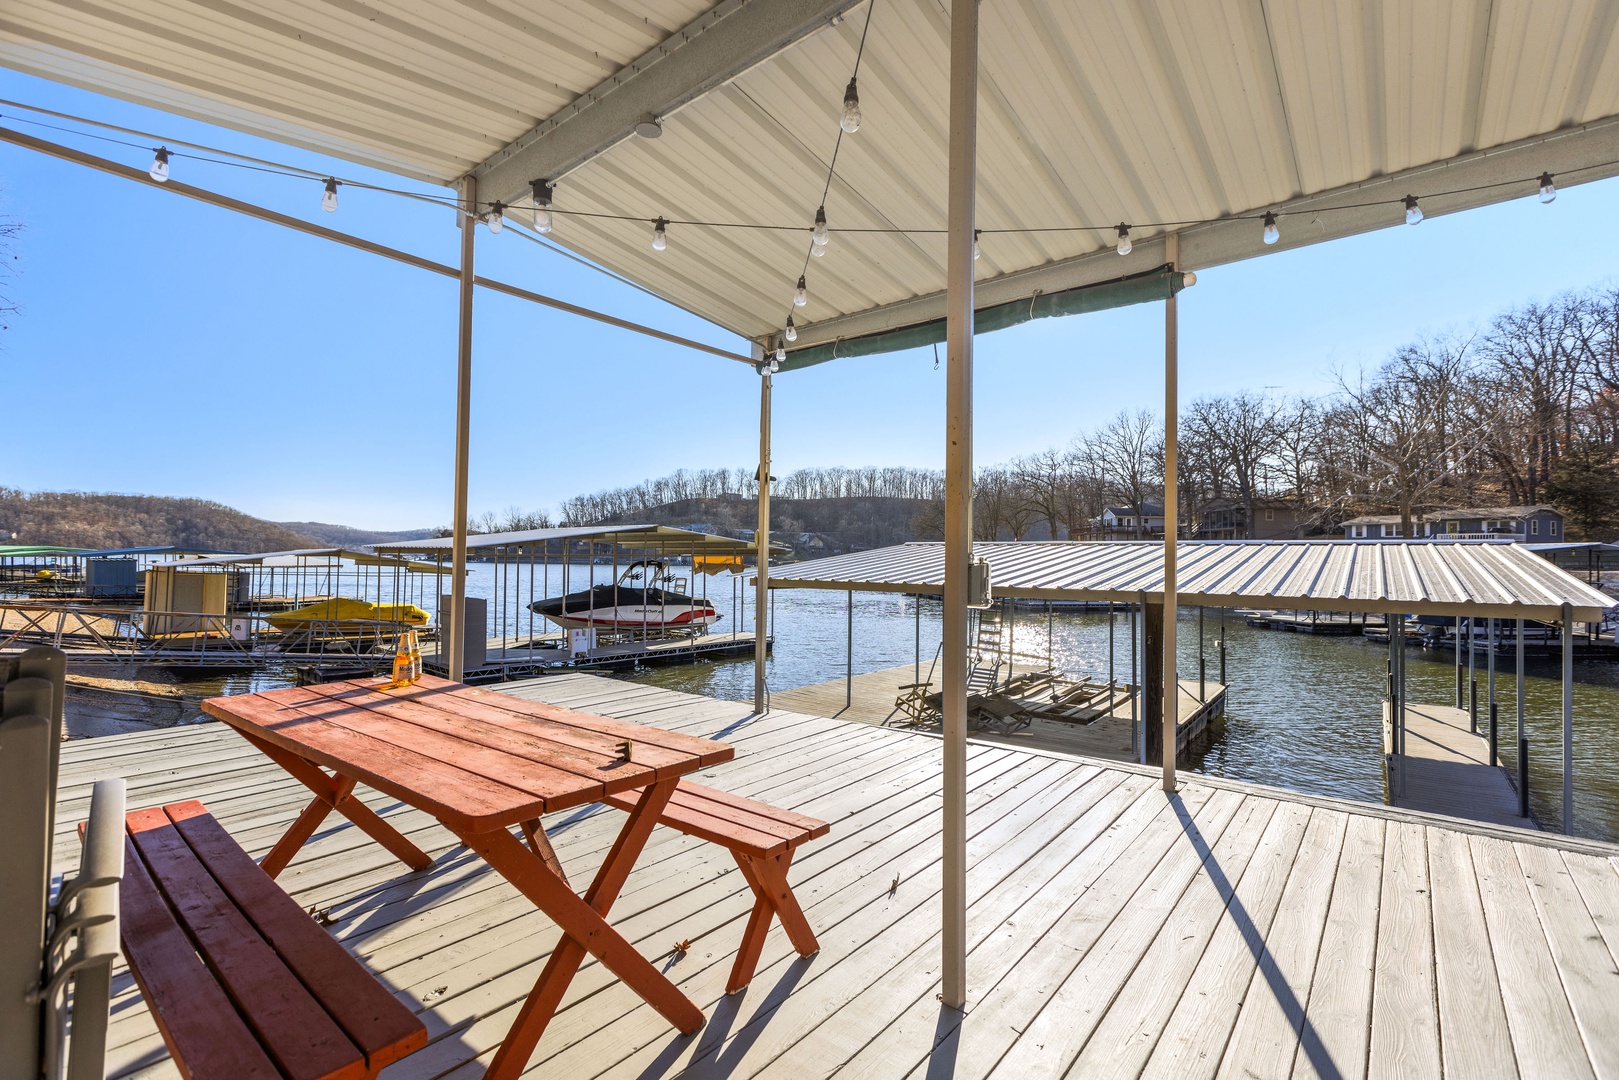 Enjoy hanging out on the dock with a 10x30 boat slip and two PWC lifts